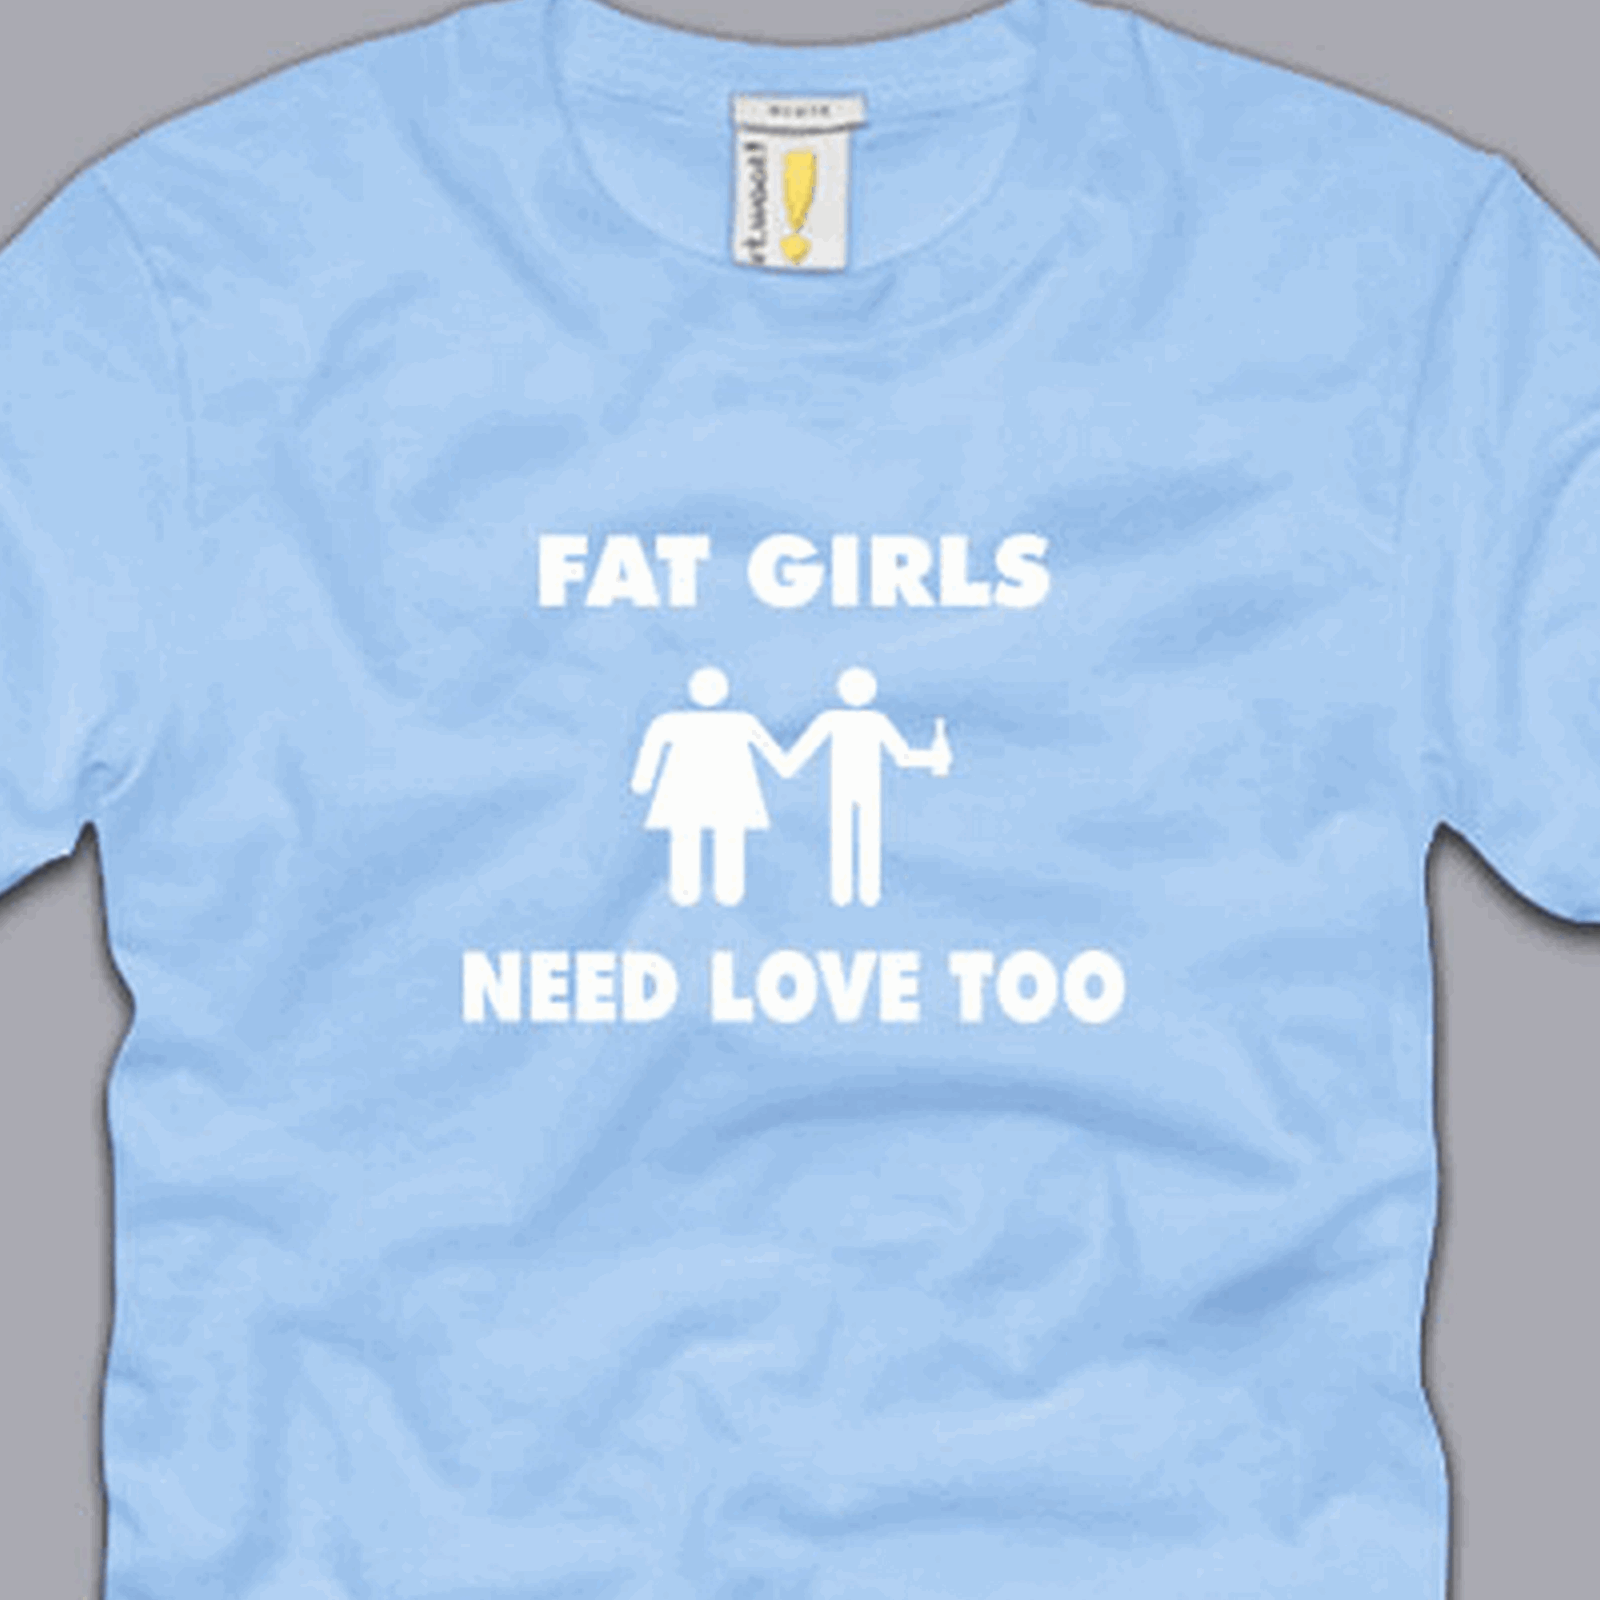 Fat Girls Need Love Too S M L Xl 2xl 3xl Shirt Funny Drunk Beer Party